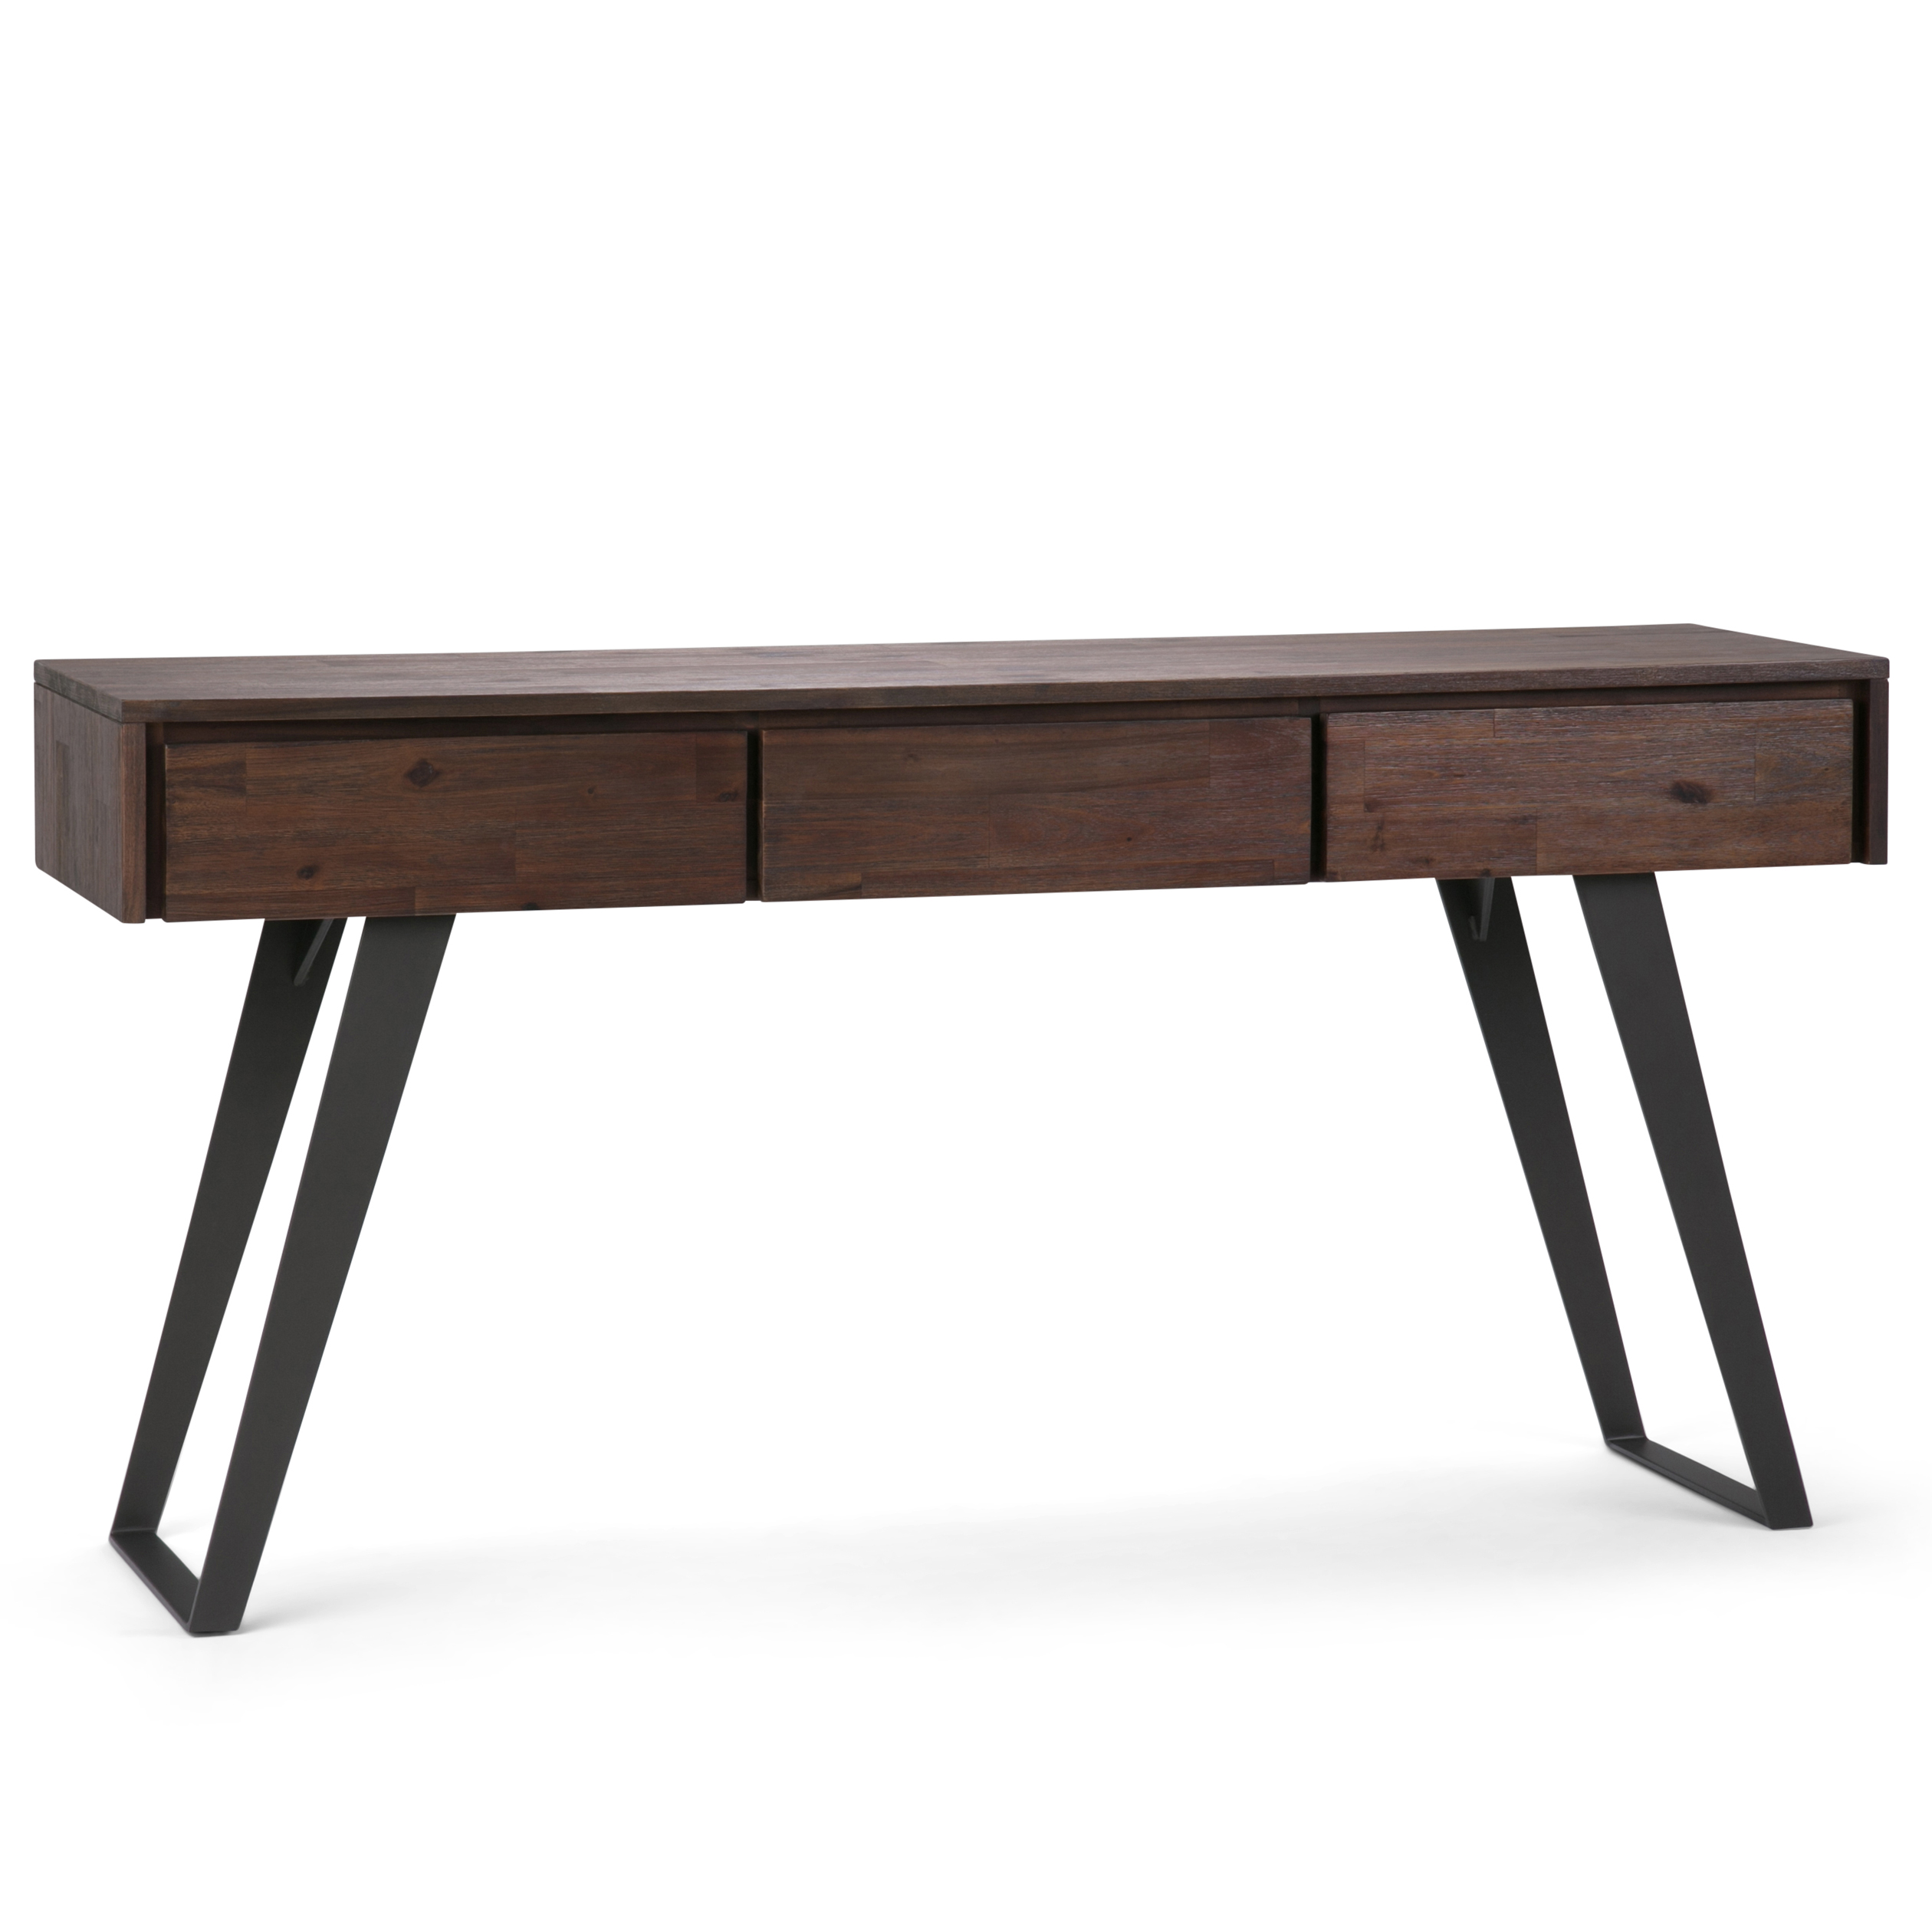 Simpli Home AXCLRY-03 Lowry Solid Acacia Wood and Metal 60 inch wide Modern Industrial Console Sofa Table in Distressed